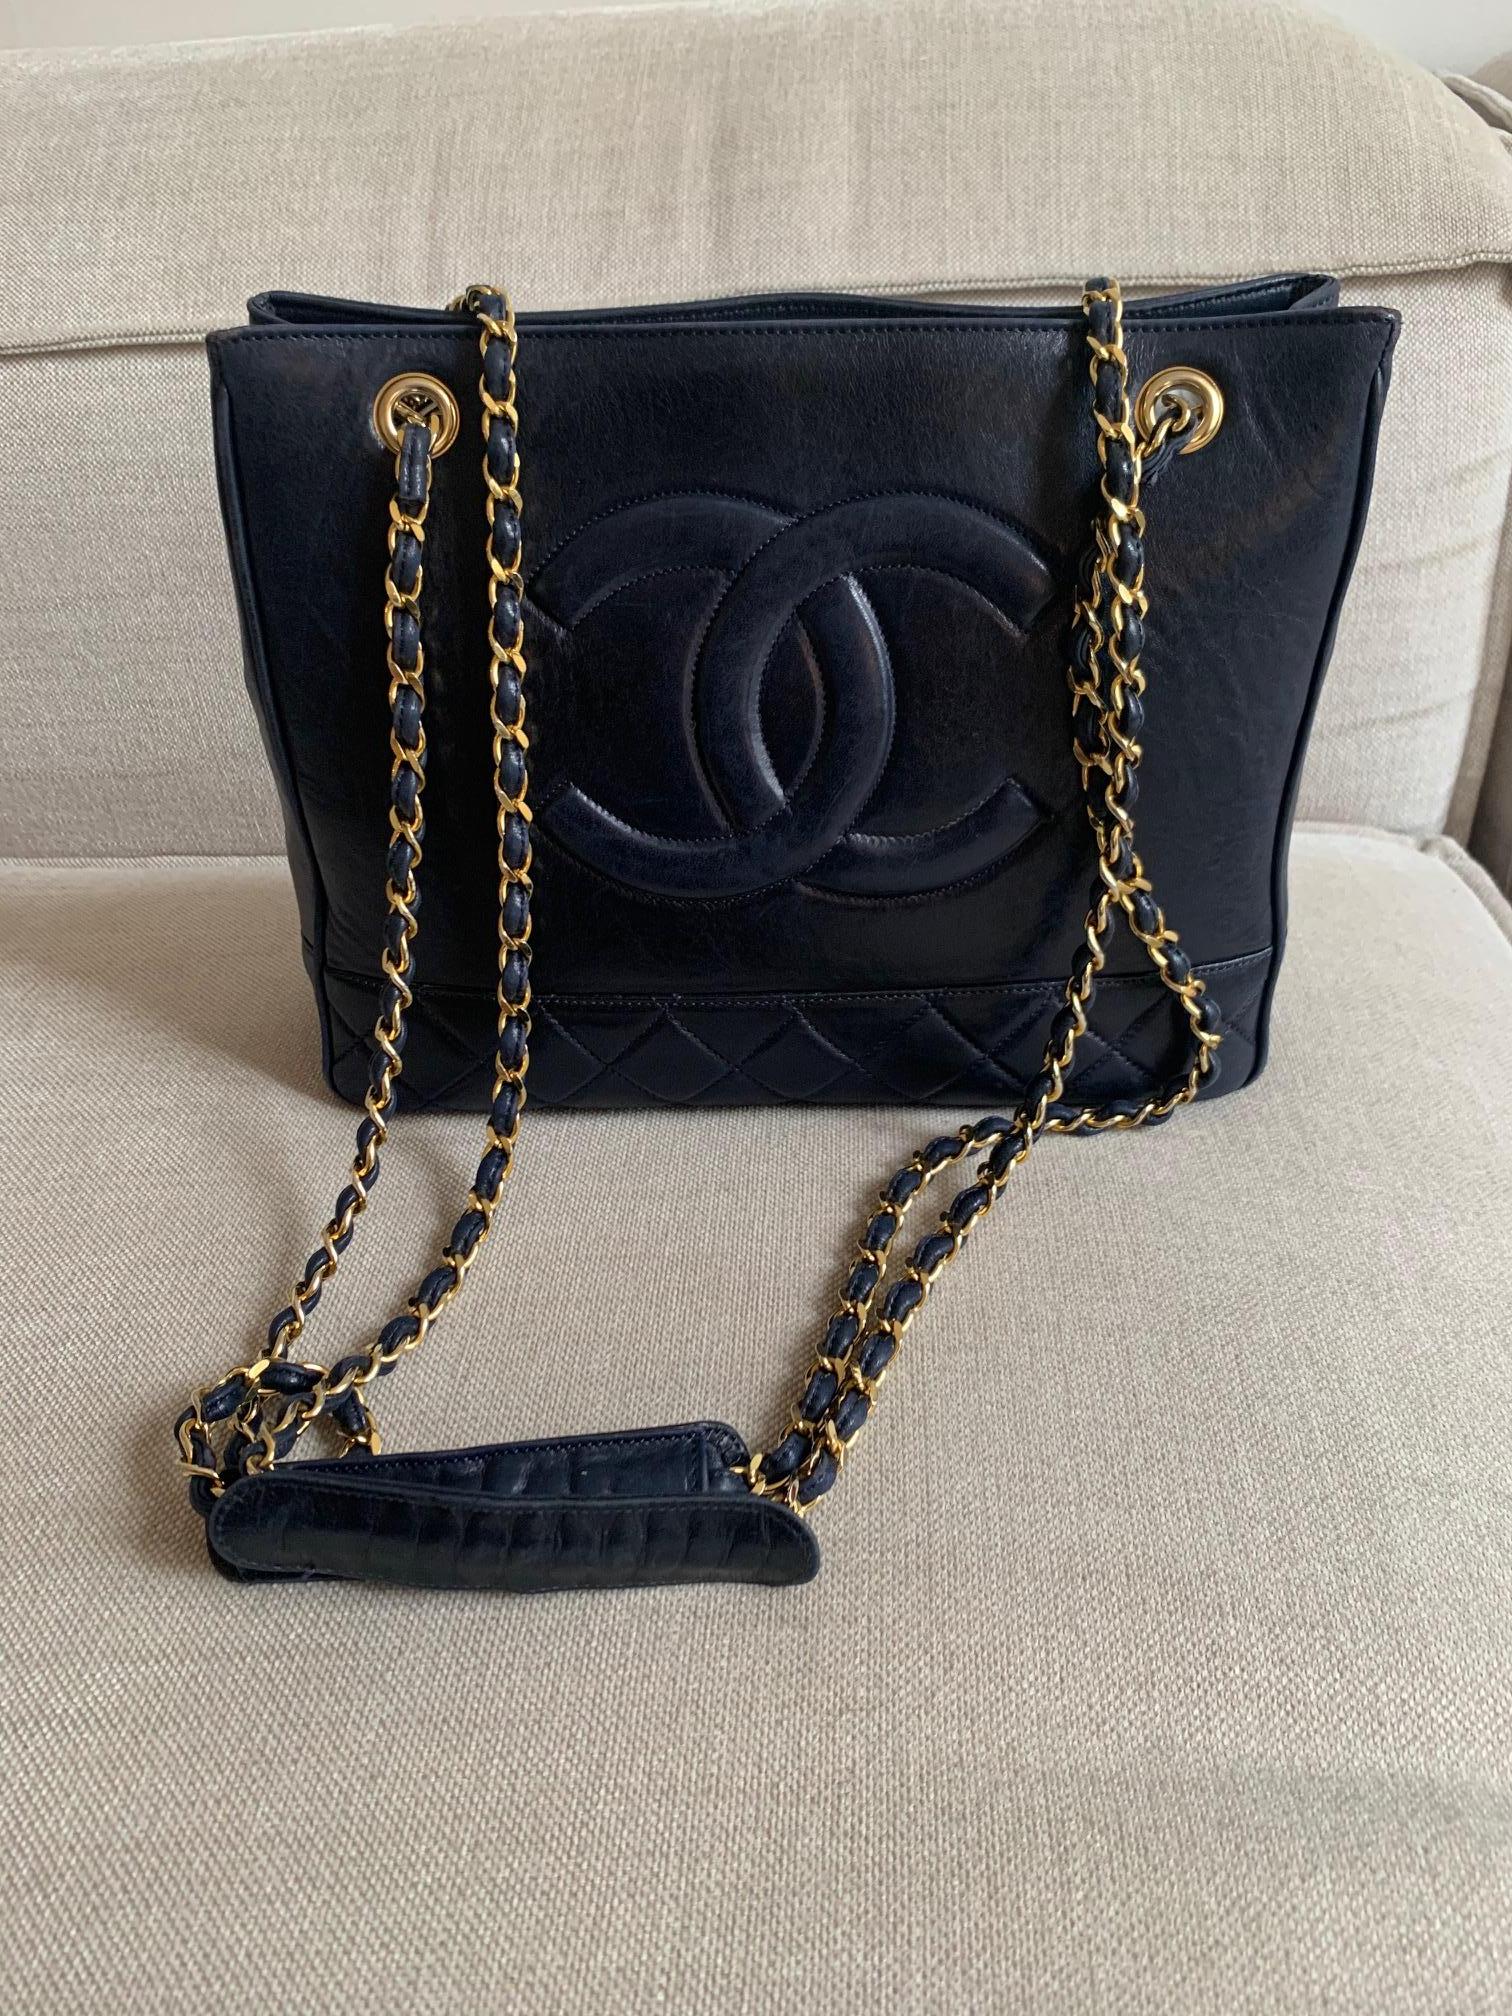 Vintage Chanel Cabas Circa 1980
Navy Leather / Half quilted leather at the bottom 
Inside Red leather 
Pocket inside and outside at the back 
Good condition 
Gold Chain 
Very Nice and Rare vintage Chanel Bag 

Dimensions:
32cm Width 
24cm Height
7